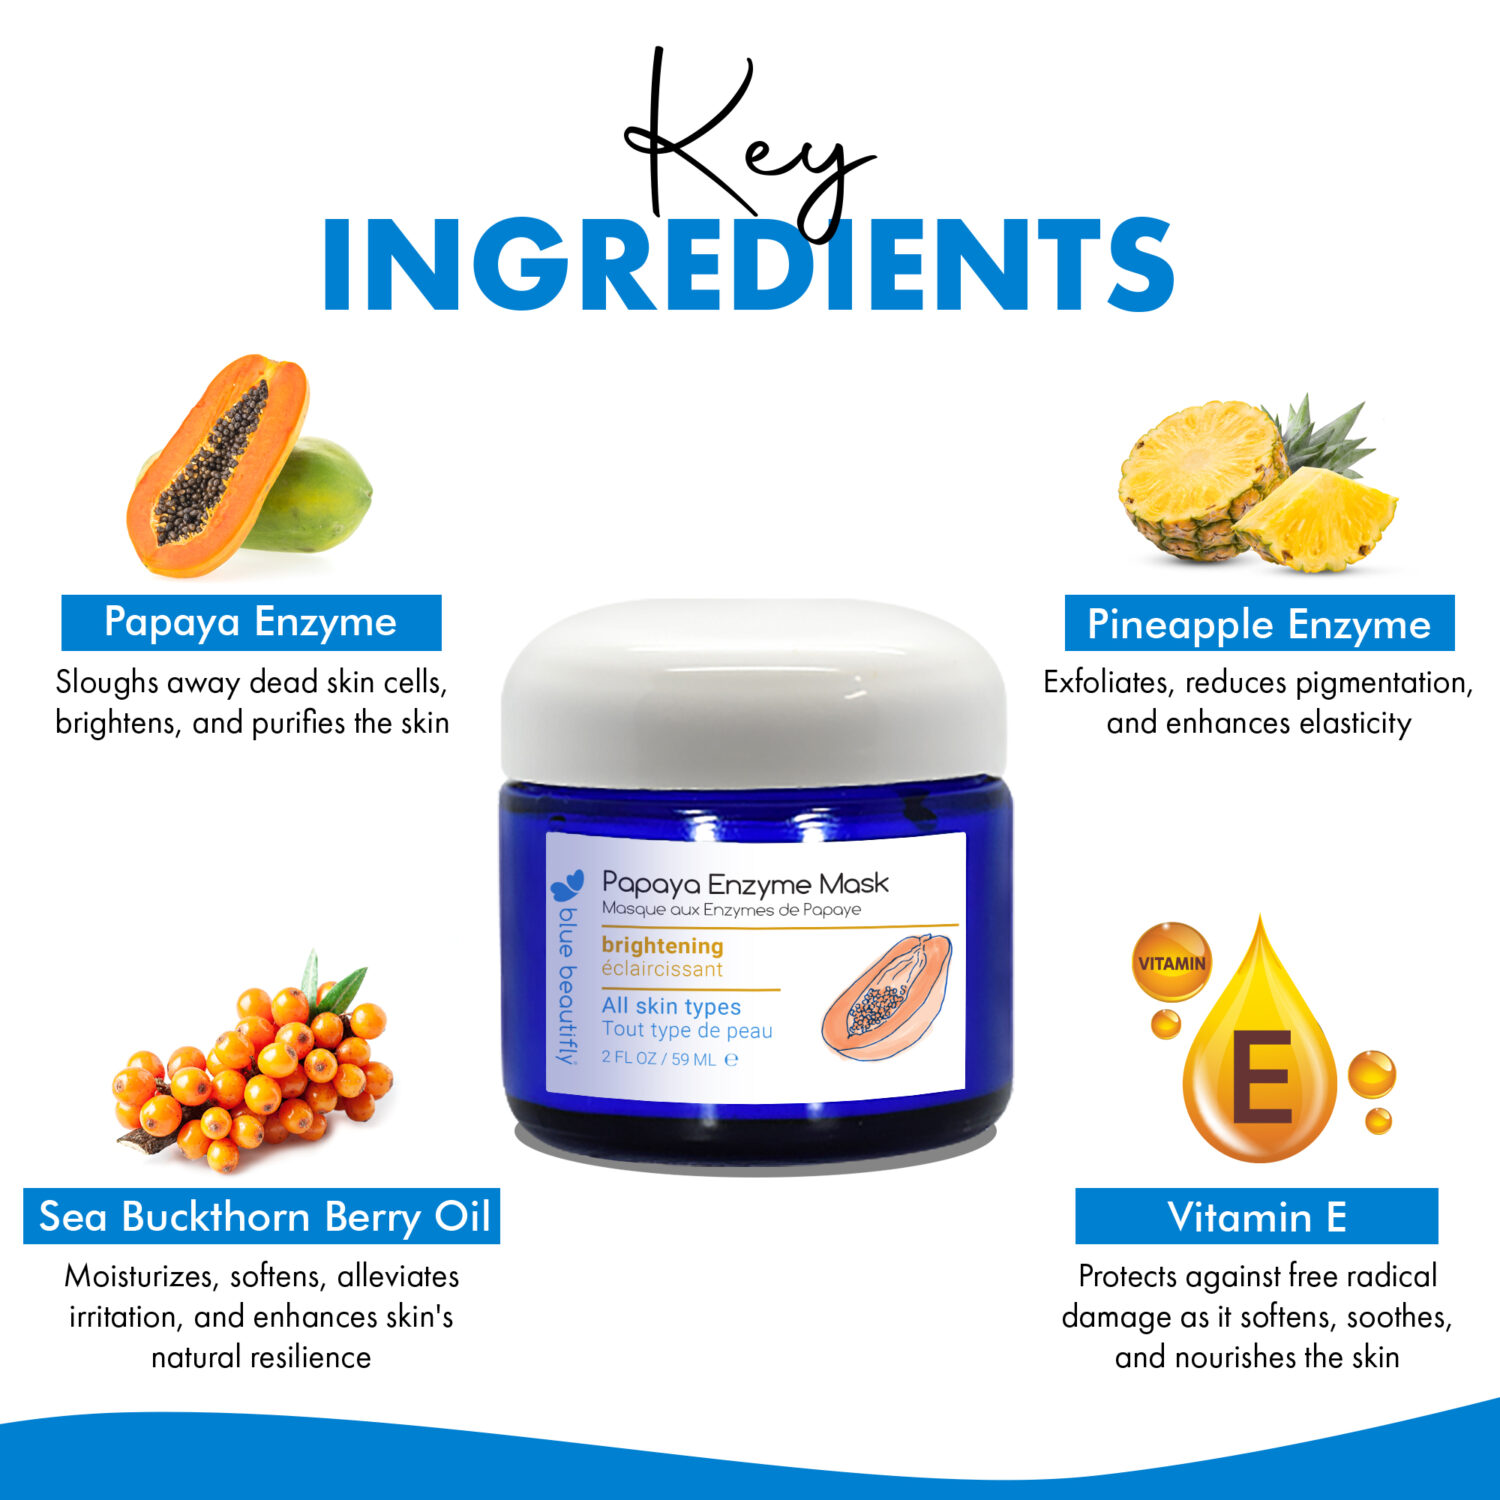 Blue Beautifly Papaya Enzyme Mask - Key ingredients are Papaya Enzyme, Pineapple Enzyme, Sea Buckthorn Berry Oil, and Vitamin E